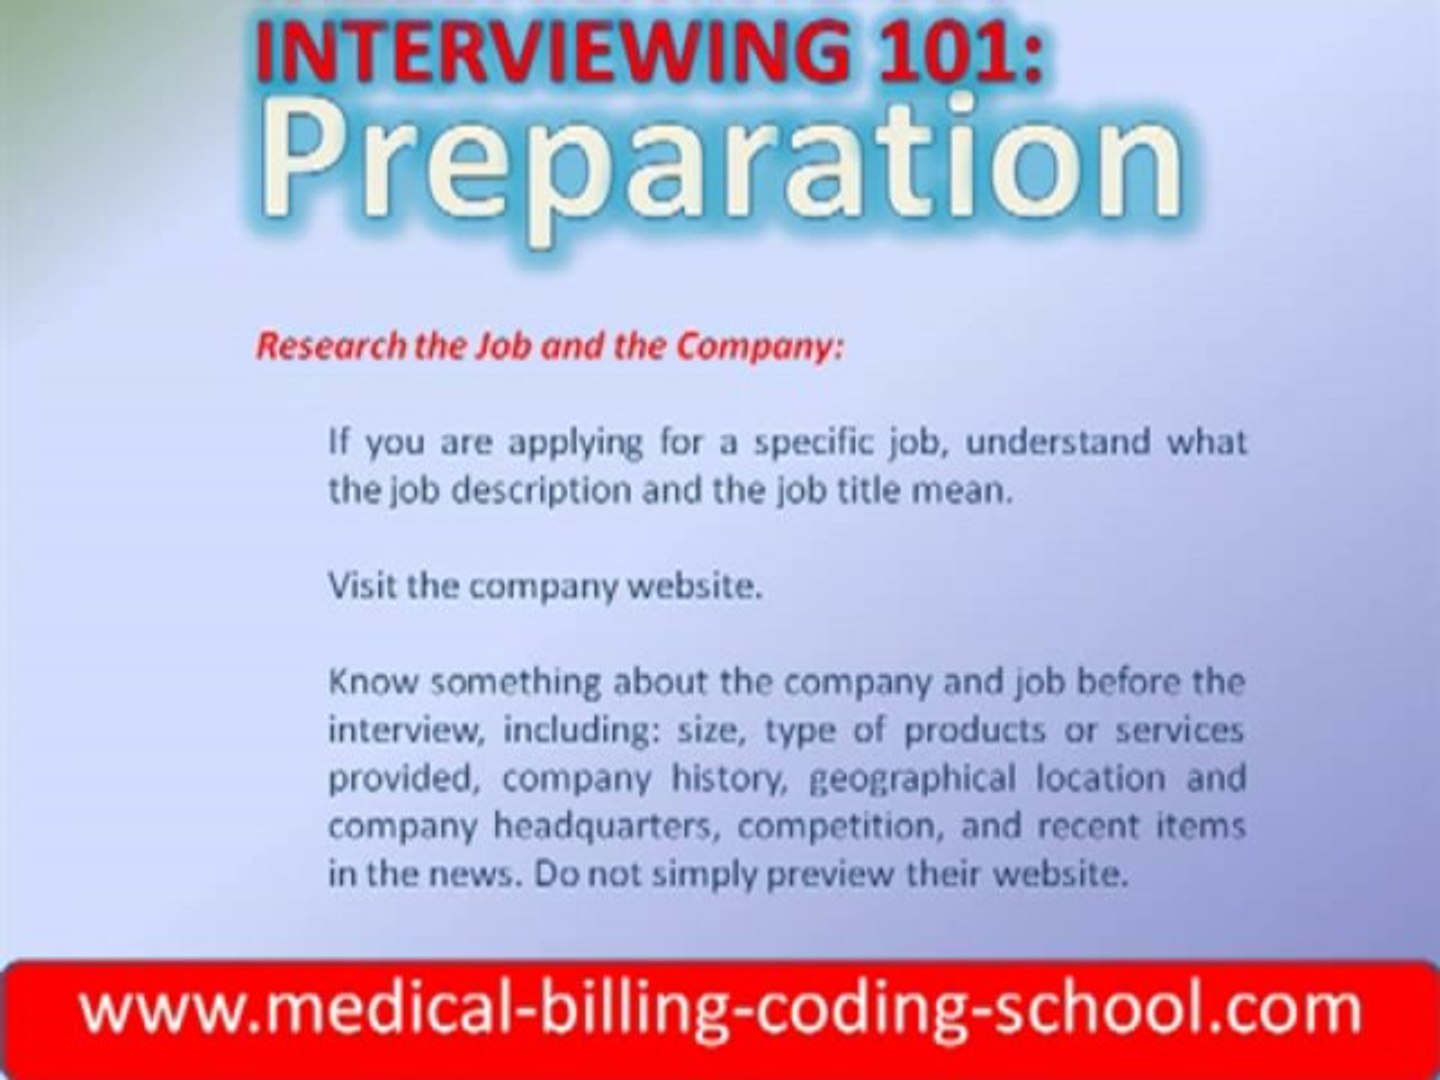 Medical Billing and Coding School Interview Tips